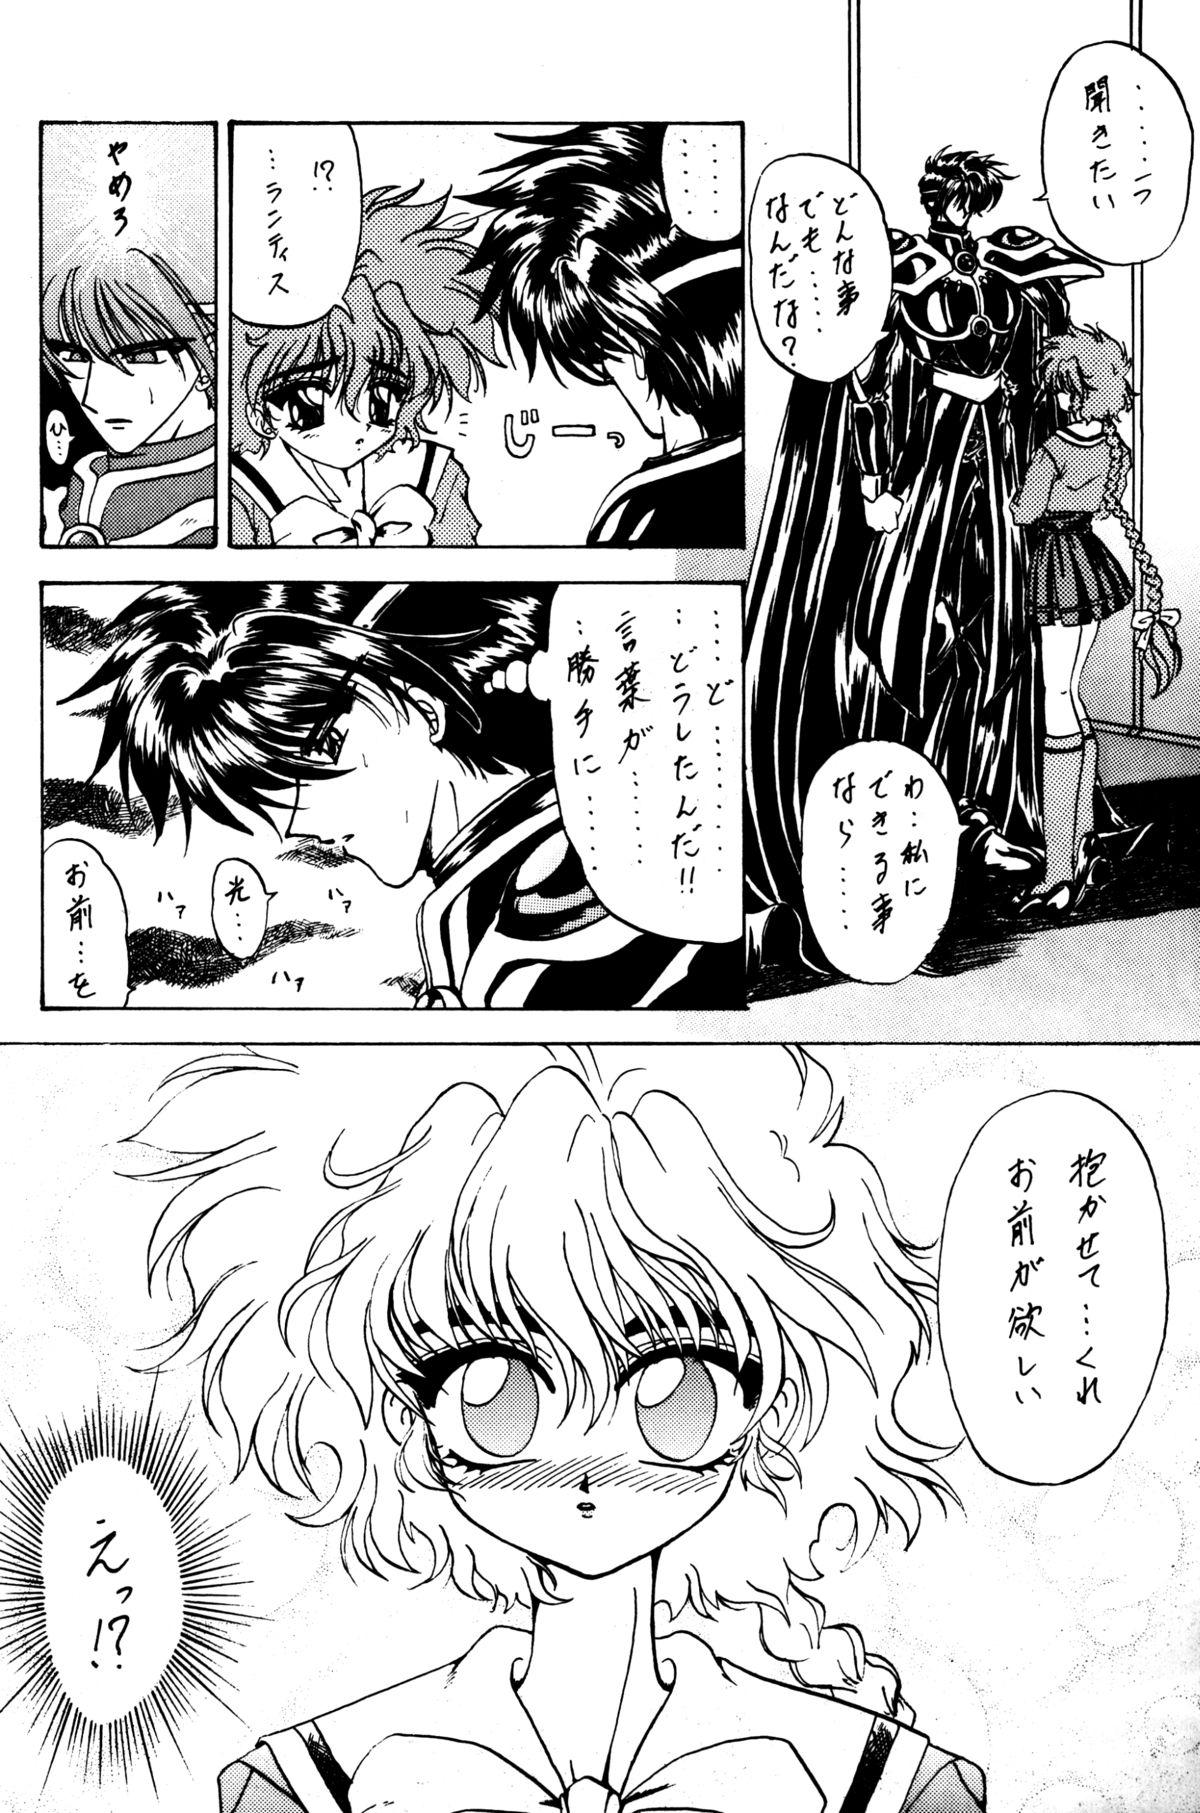 Ass Sex Stale World II - Magic knight rayearth Gay Public - Page 7